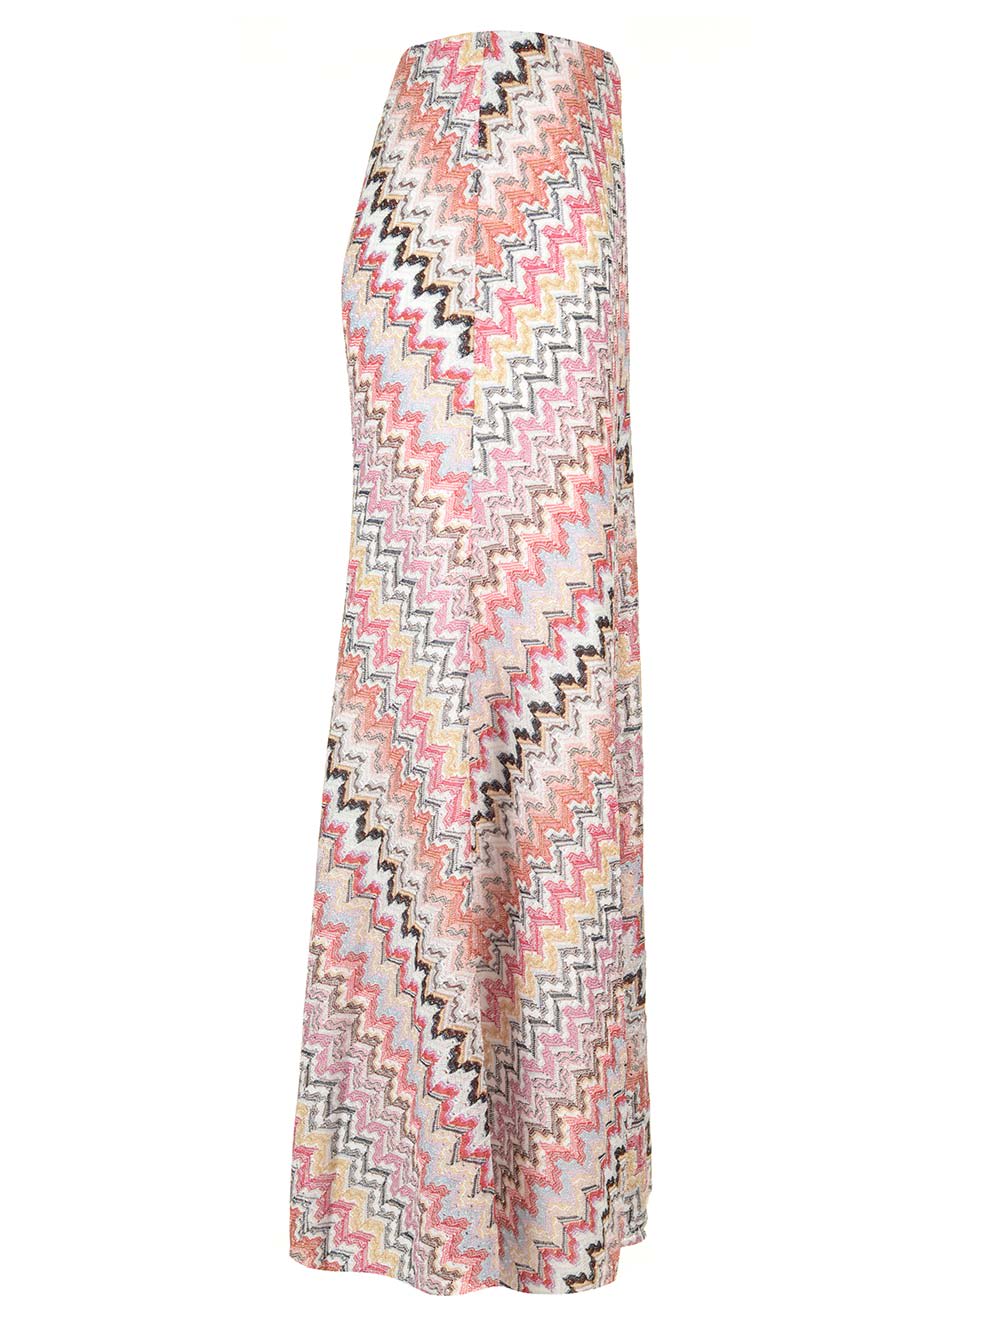 Shop Missoni Viscose Knit Maxi Skirt In Pink/white